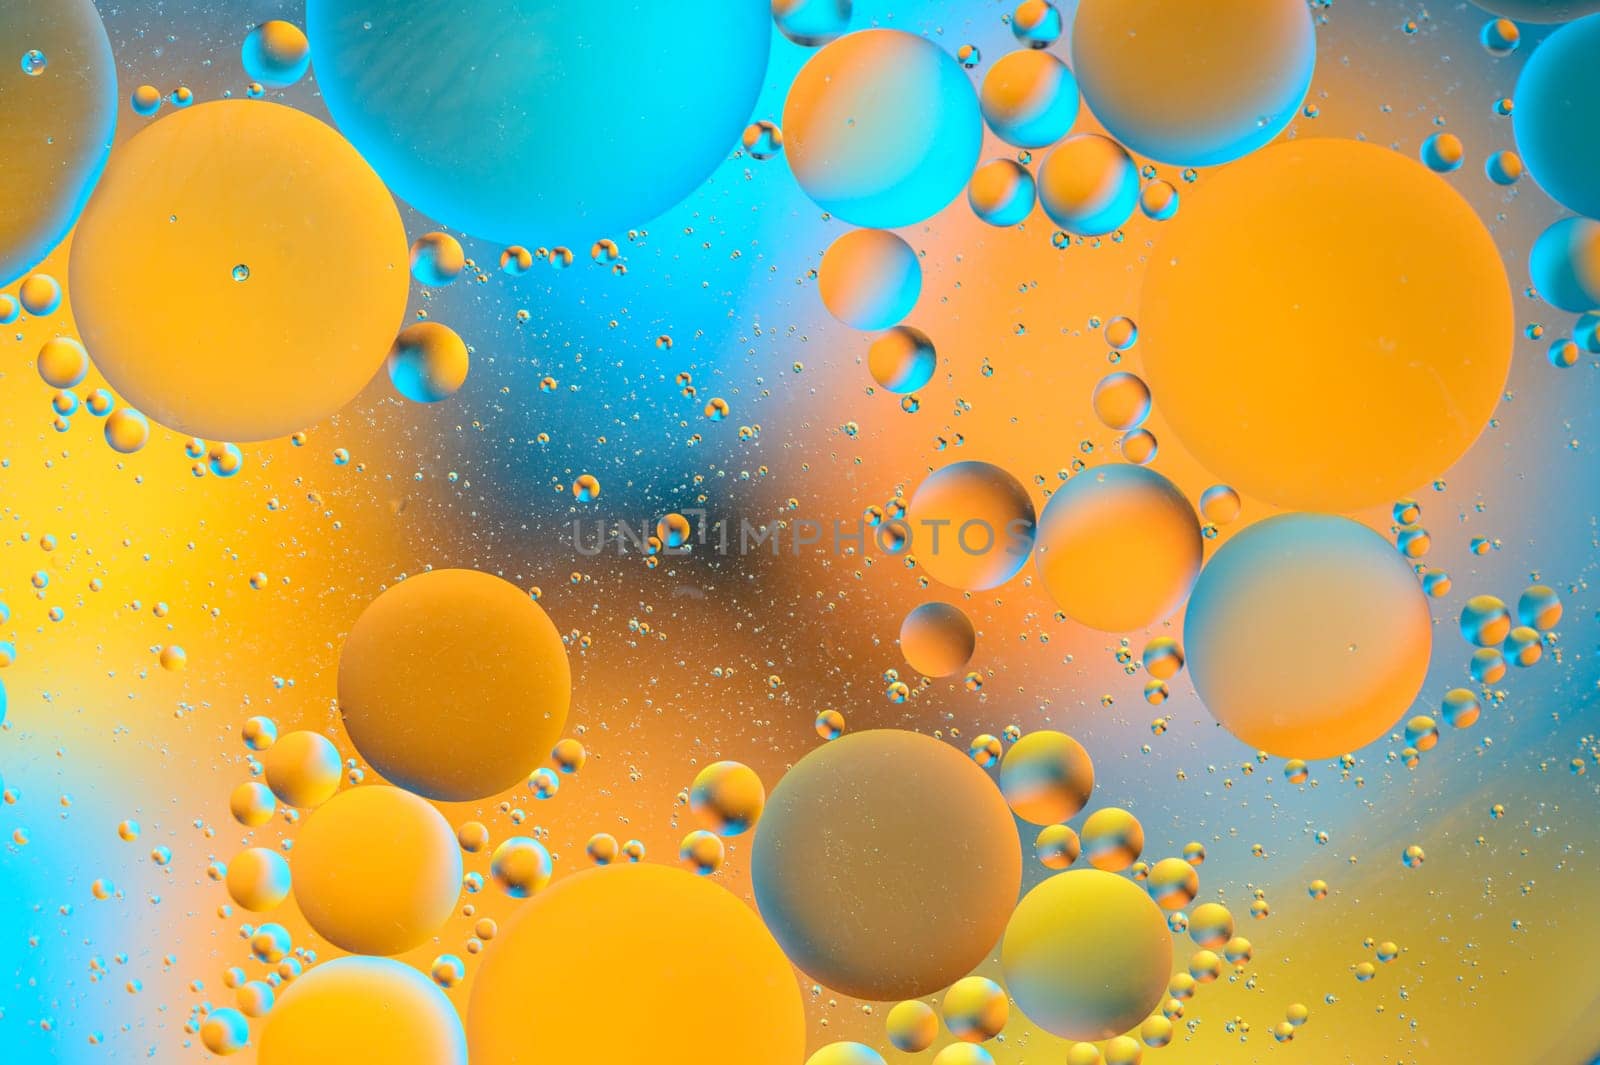 abstract background of multi-colored spots and circles microcosm universe galaxy 10